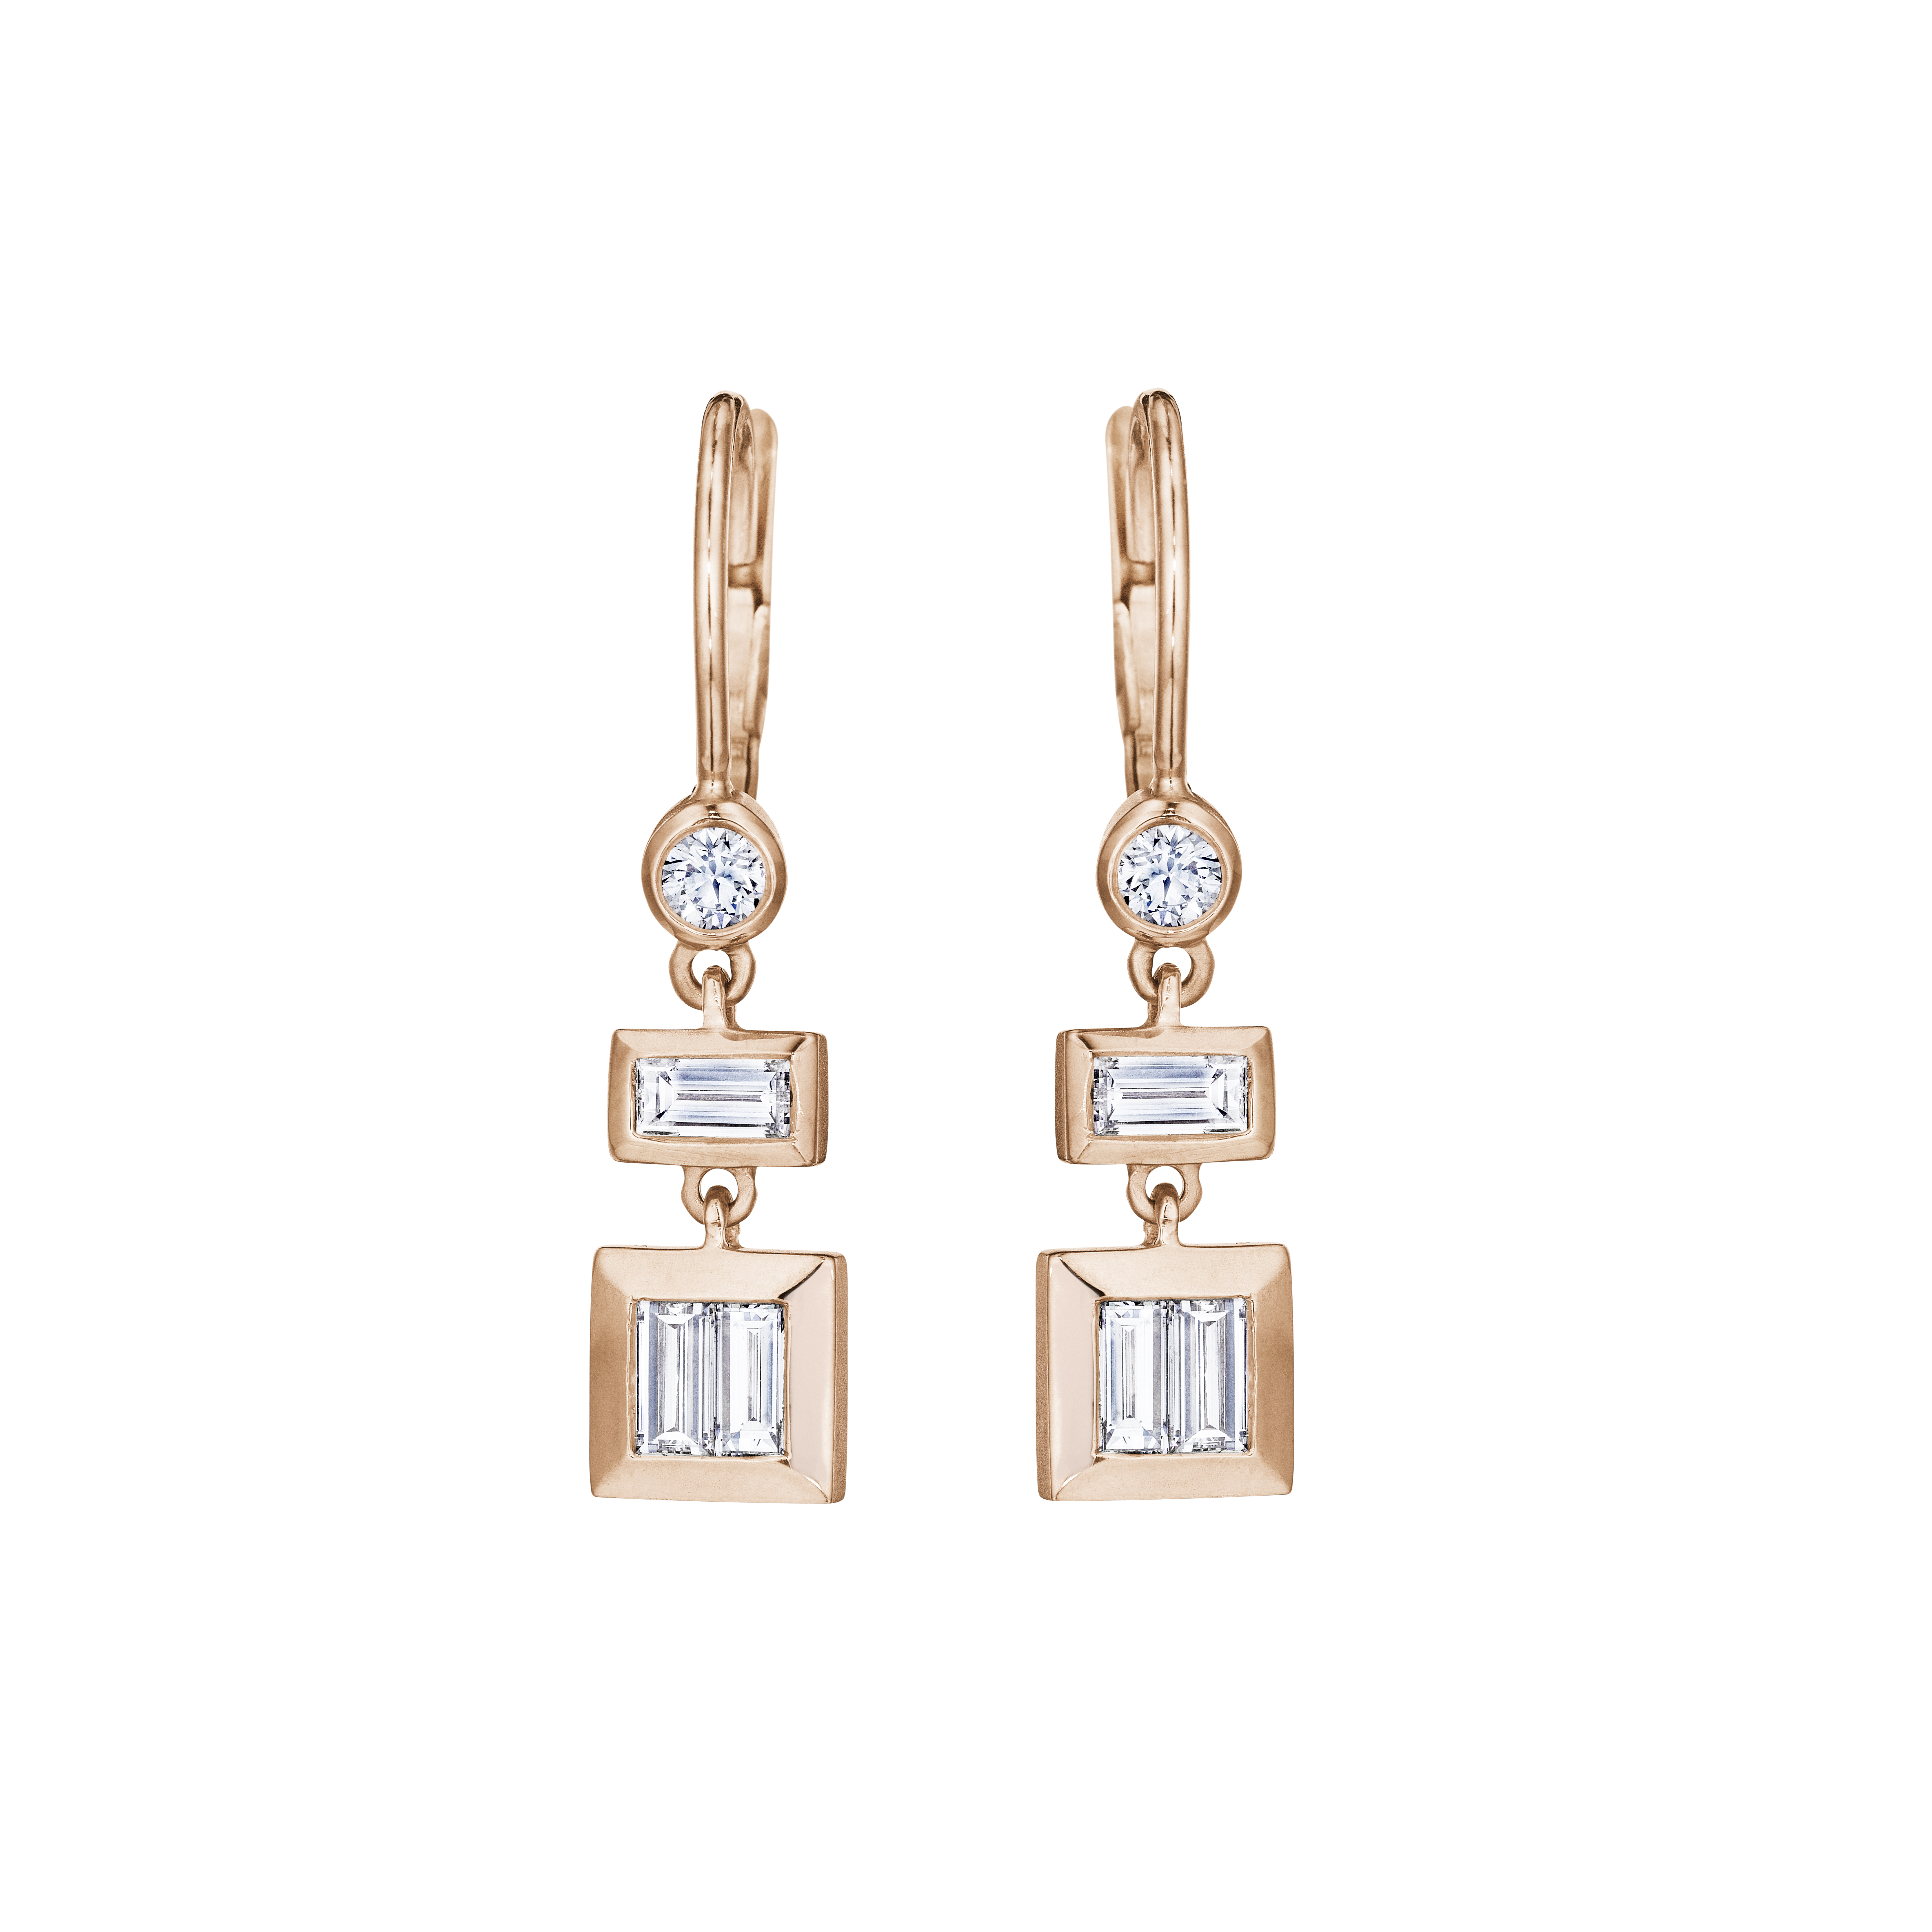 Moderne Small Everyday Deco earrings 